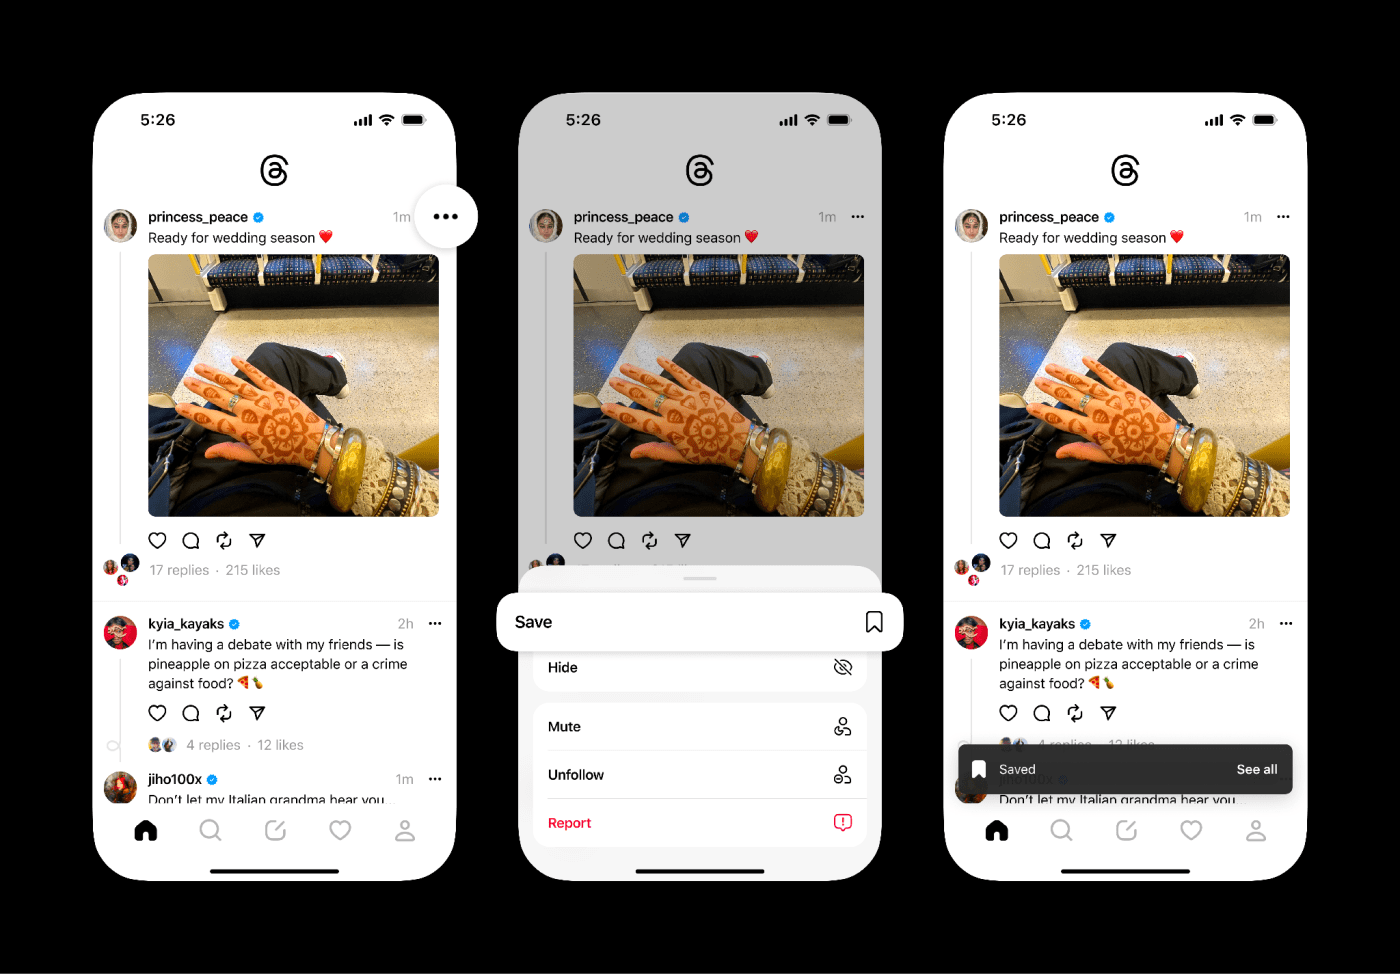 Meta's Threads app is getting a bookmarking feature to save posts